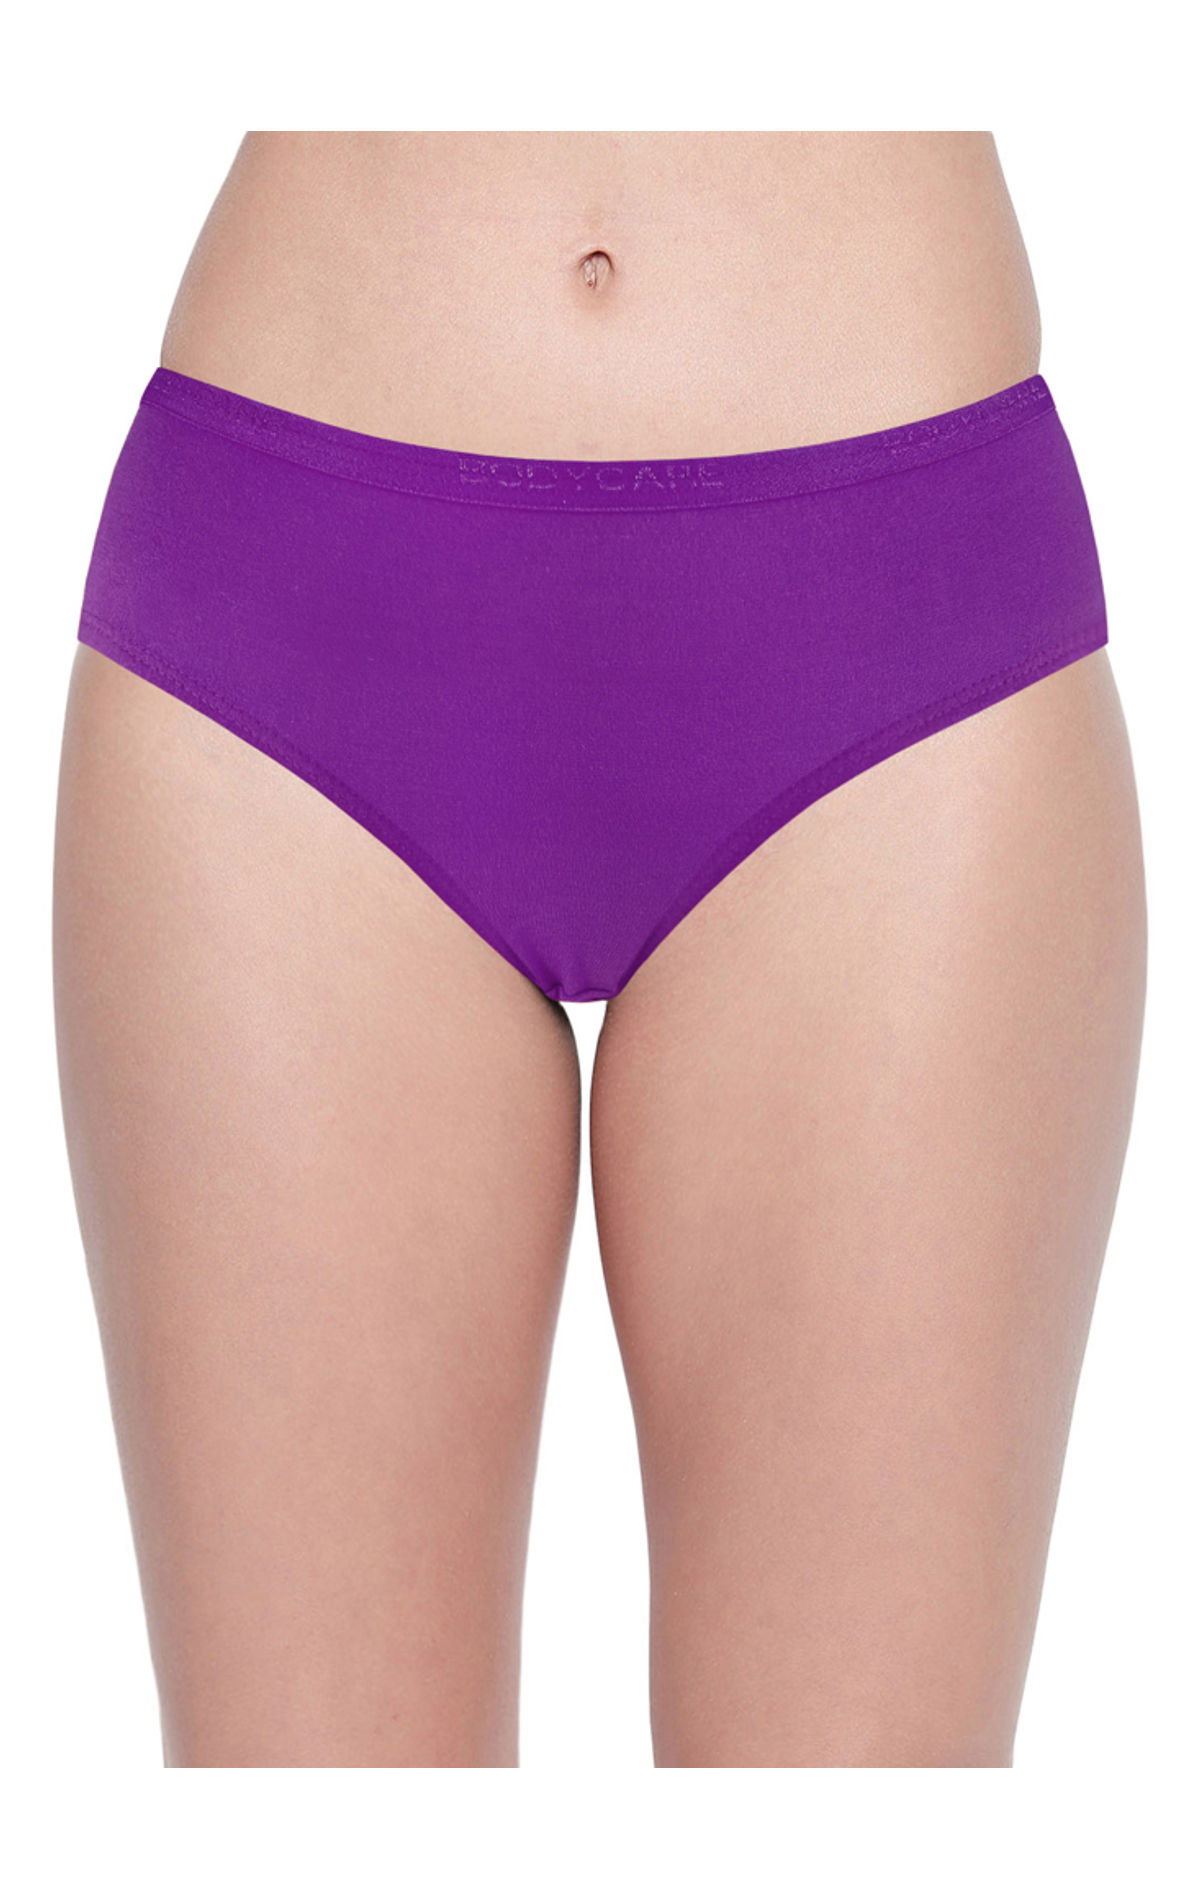 Bodycare Pack Of 3 High Cut Panty In Assorted Colors-7500, 7500-3pcs